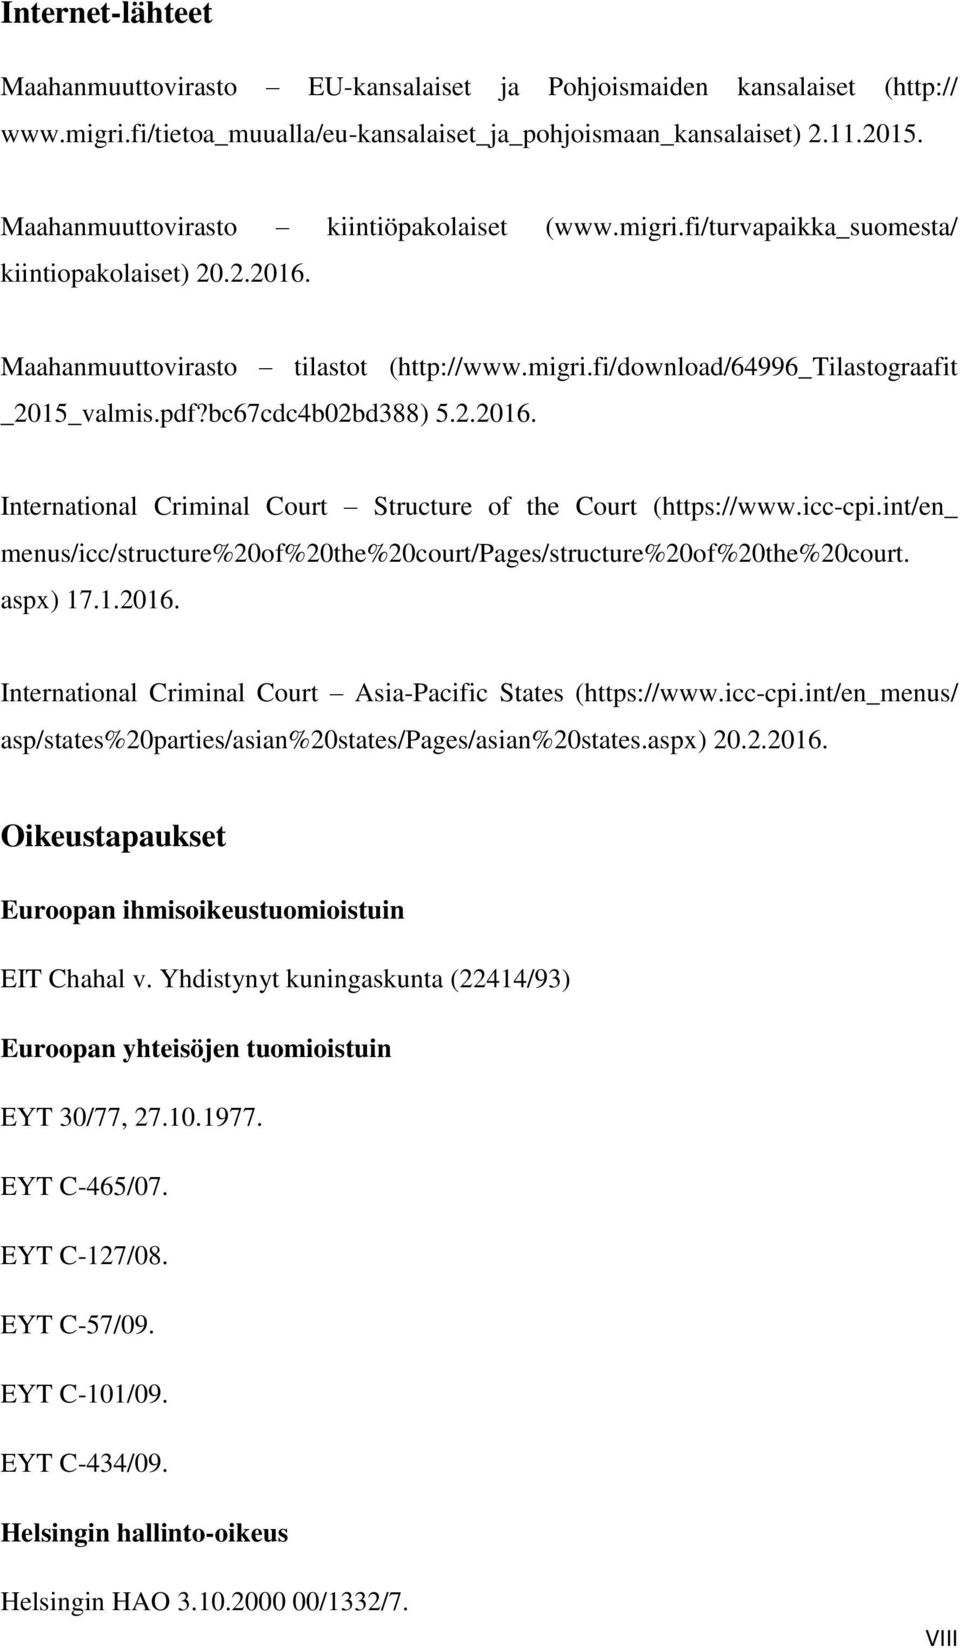 pdf?bc67cdc4b02bd388) 5.2.2016. International Criminal Court Structure of the Court (https://www.icc-cpi.int/en_ menus/icc/structure%20of%20the%20court/pages/structure%20of%20the%20court. aspx) 17.1.2016. International Criminal Court Asia-Pacific States (https://www.